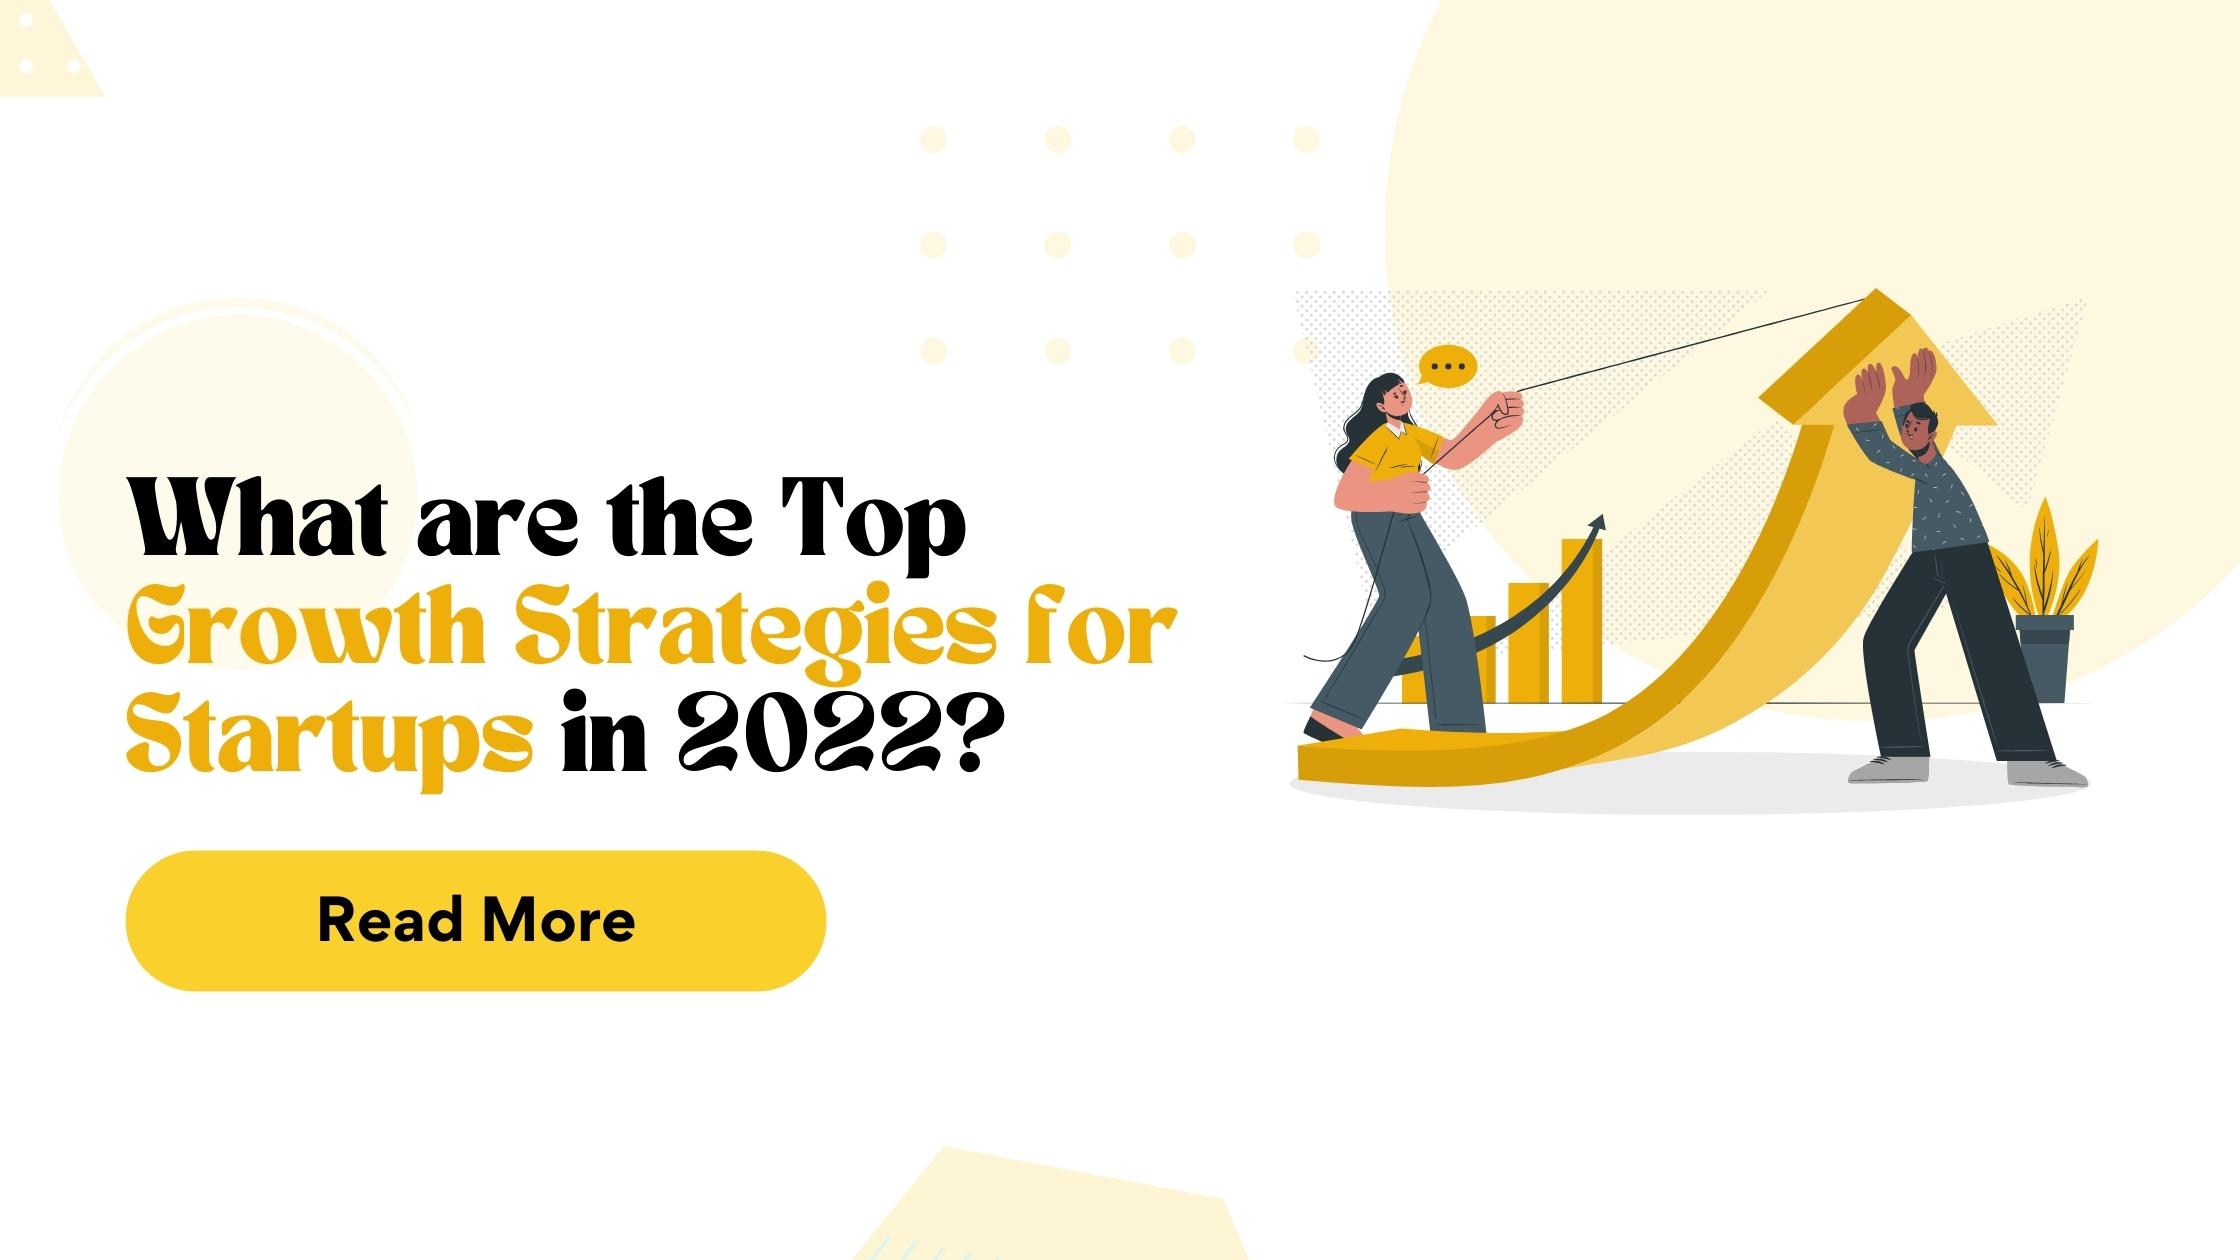 WHAT ARE THE TOP GROWTH STRATEGIES FOR STARTUPS IN 2022?